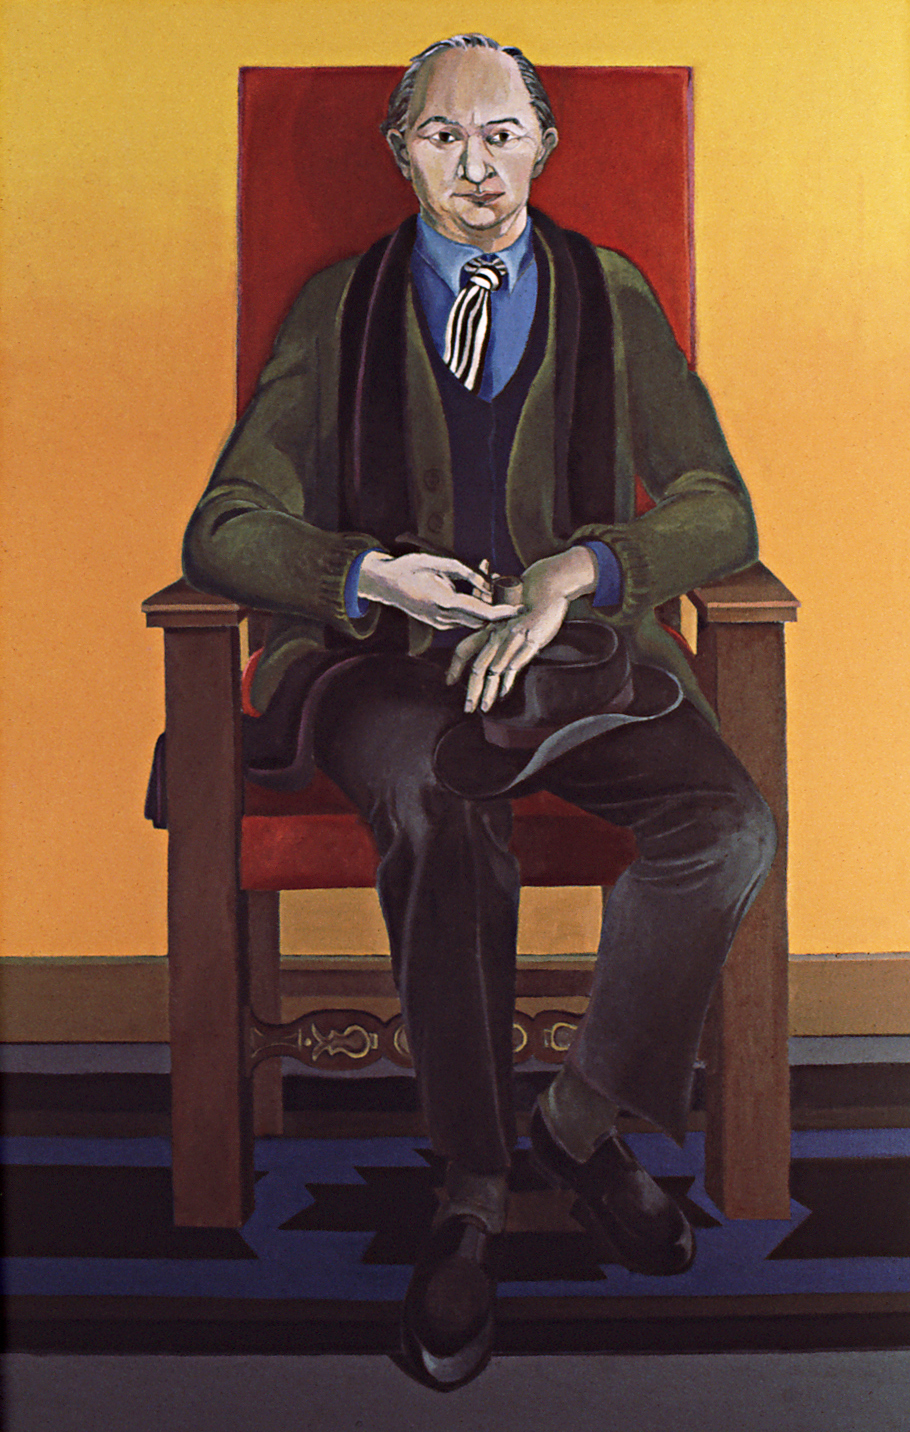 Large Figure Painting of Will Barnet by Ethel Fisher, 1967, oil on linen, 66 x 43 inches, twentieth century figure painting.